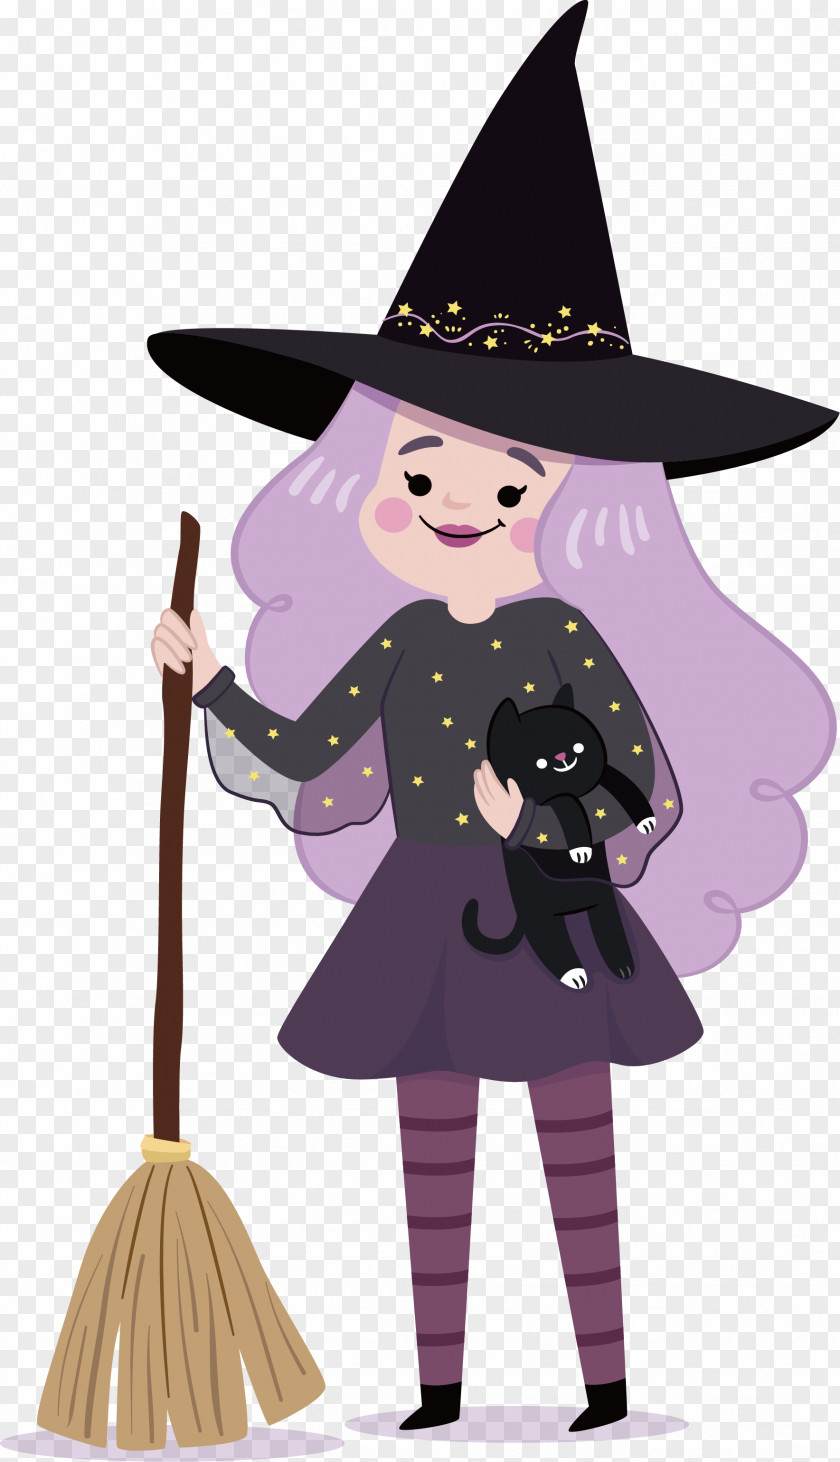 The Beautiful Witch Holding Cat Black Illustration PNG